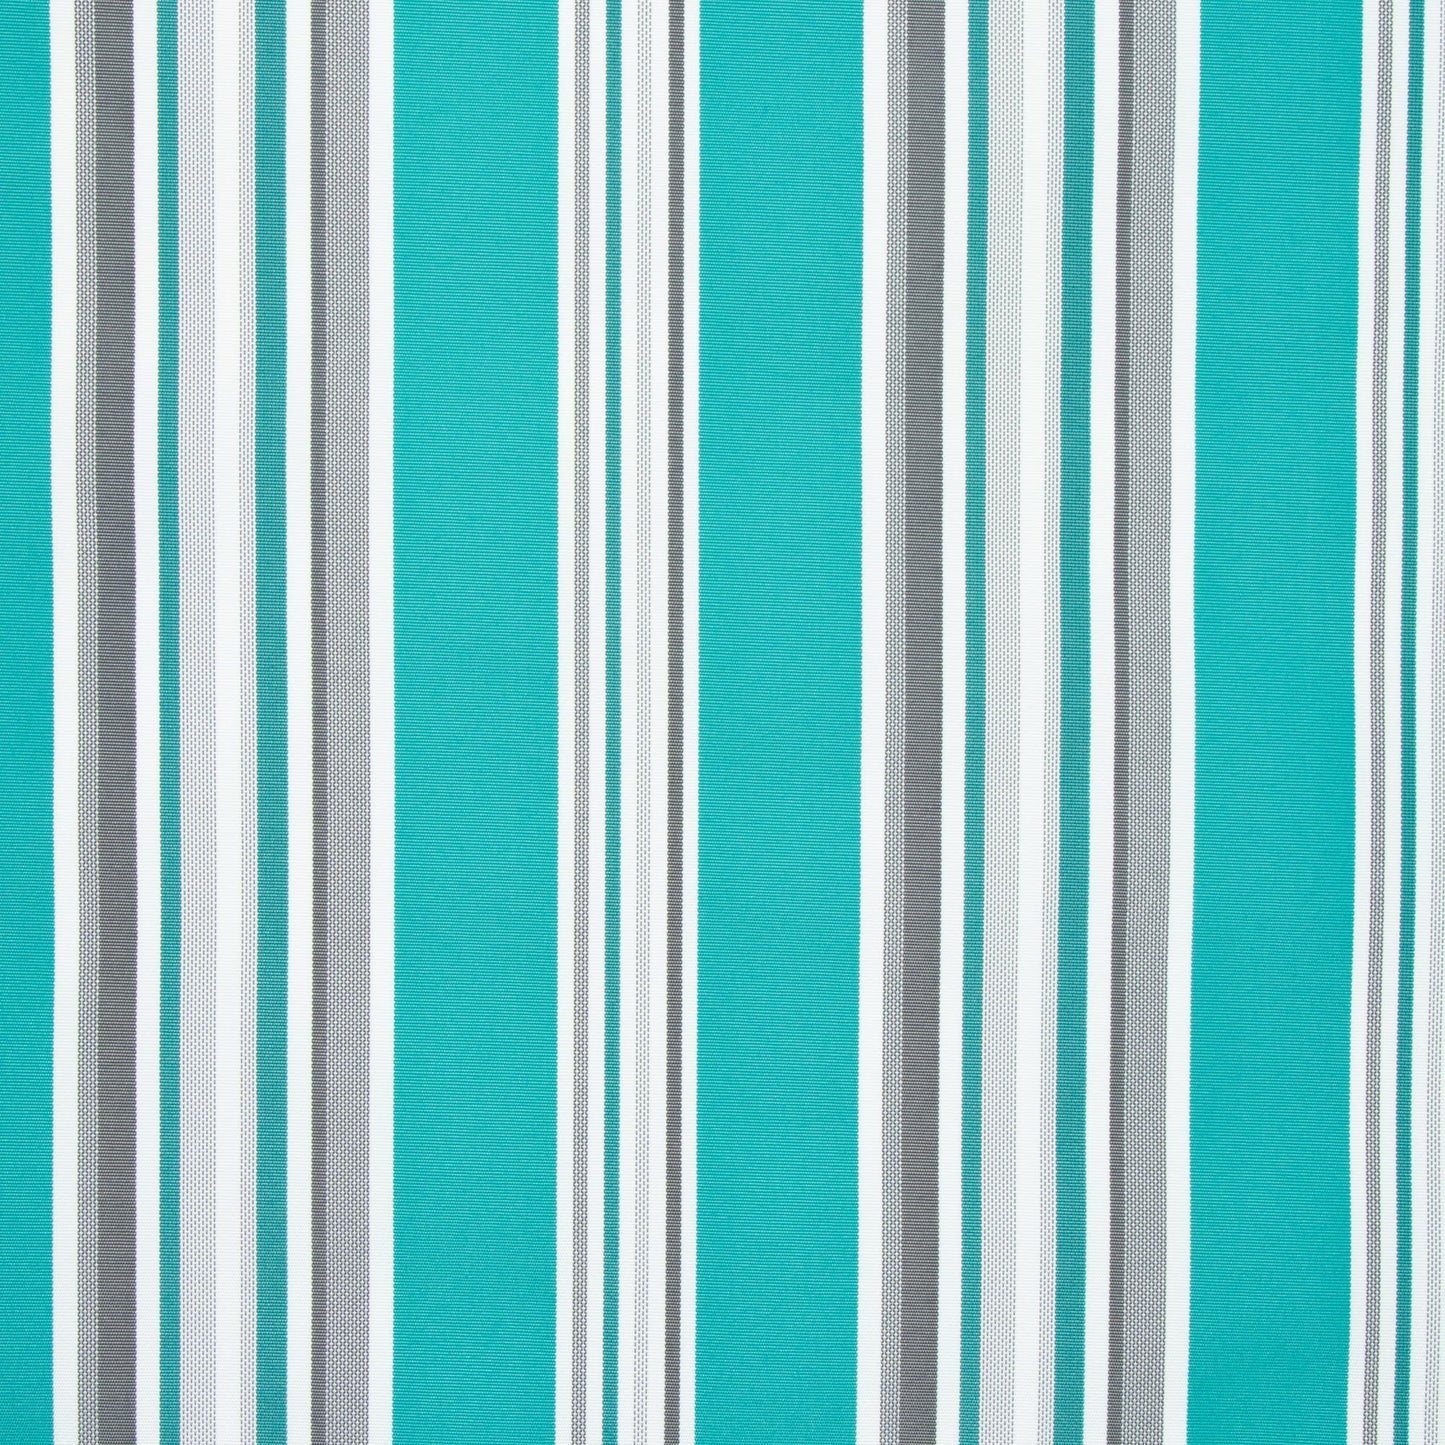 BAHAMAS Imported Outdoor Fabric Des. 02-83